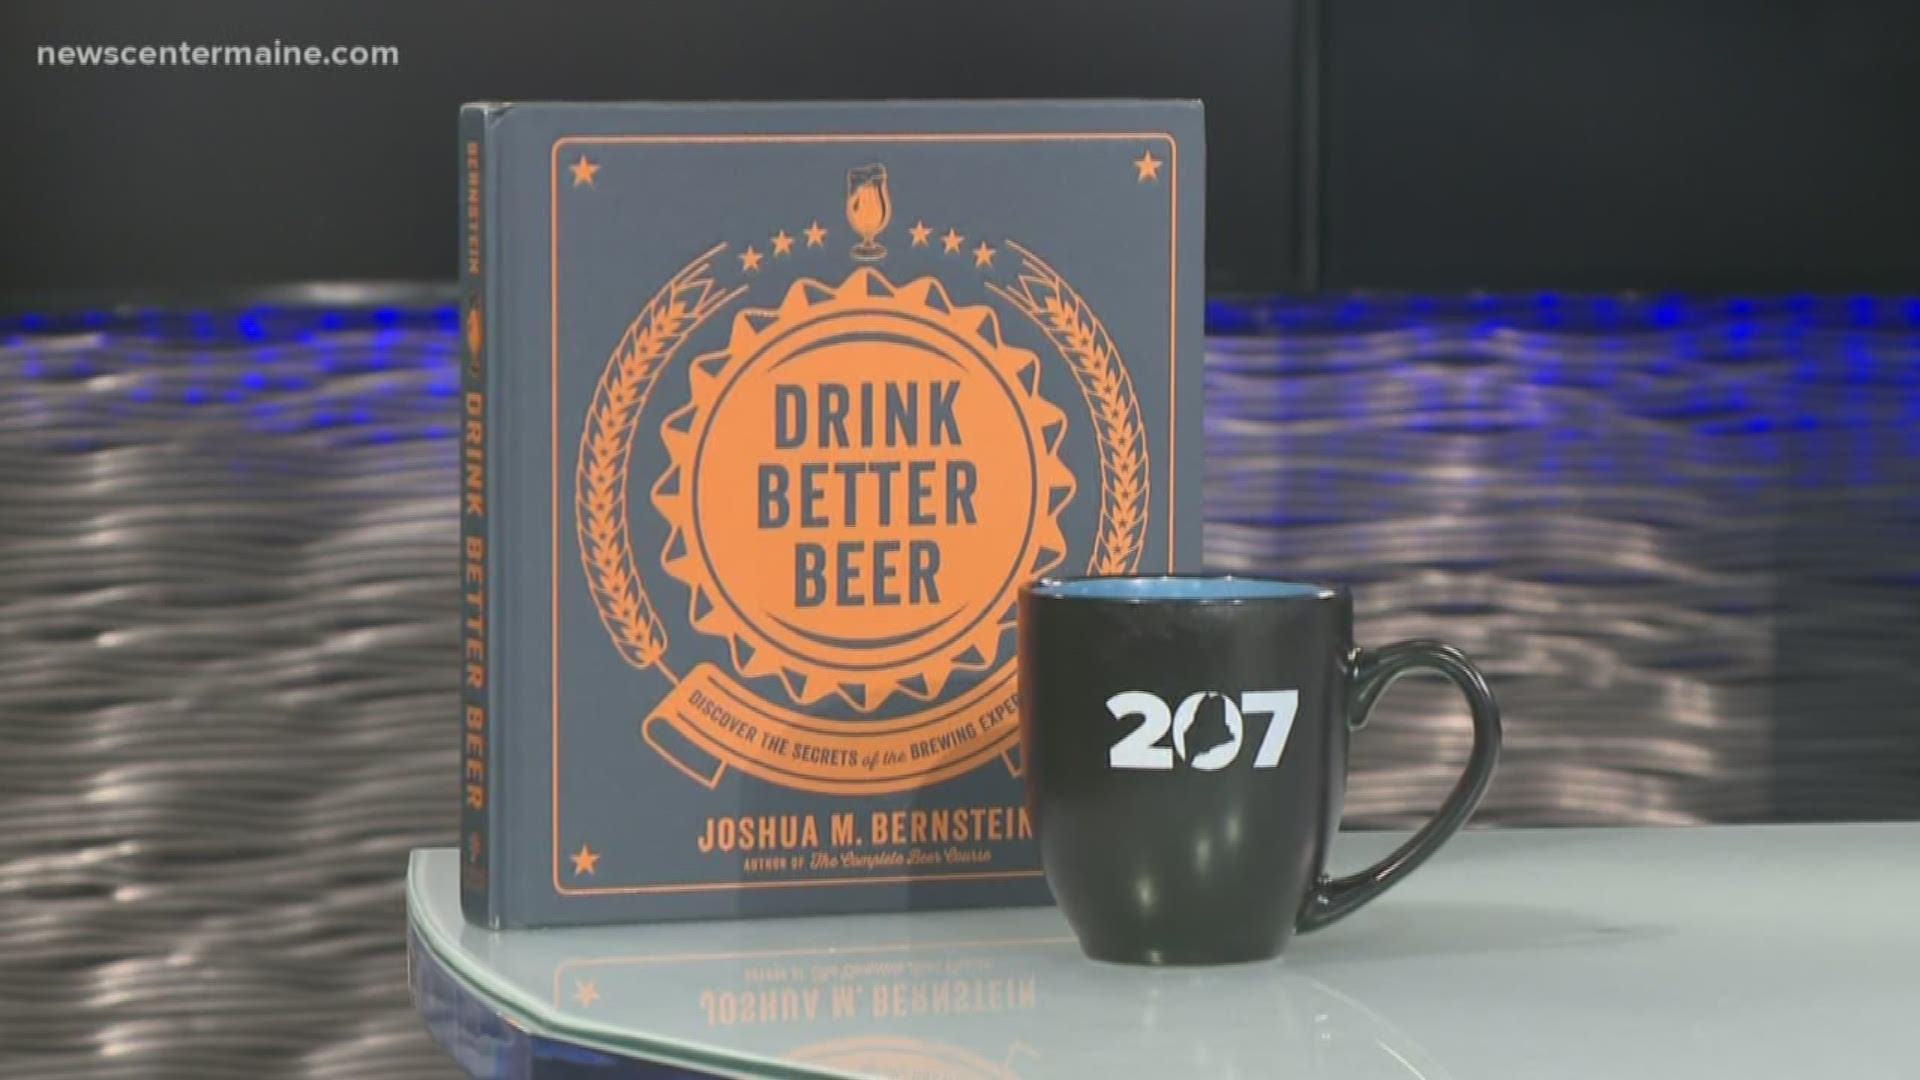 Joshua Bernstein encourages you to "Drink Better Beer" in his book about the brewing experts.